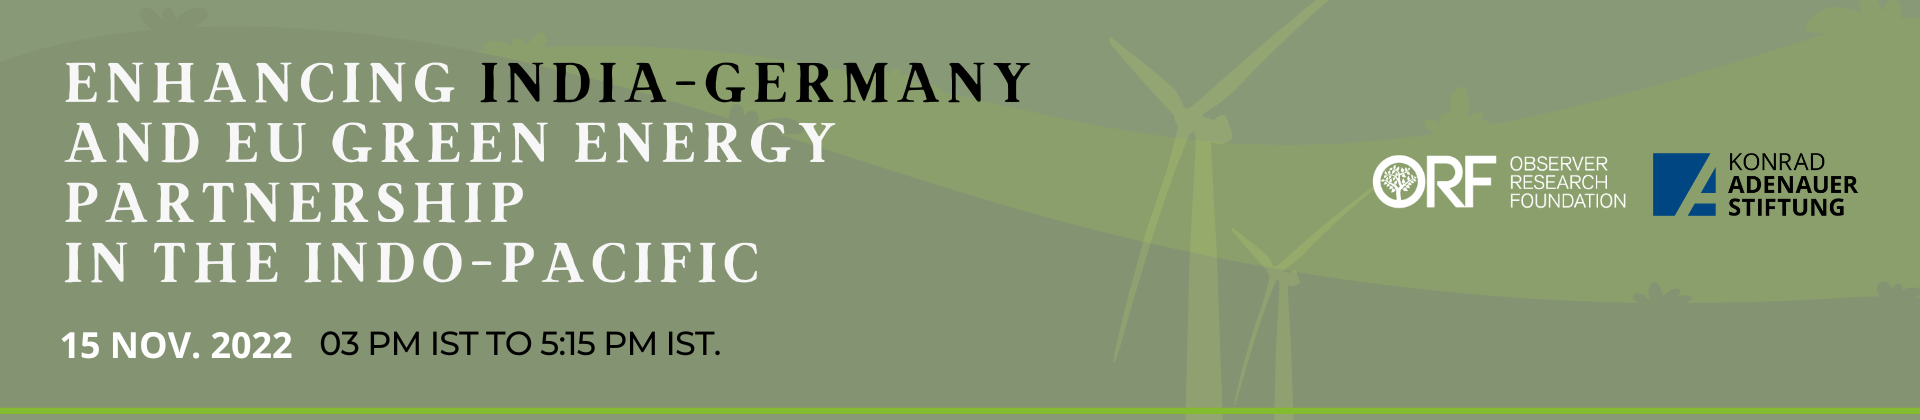 Enhancing India-Germany and EU Green Energy Partnership in the Indo-Pacific